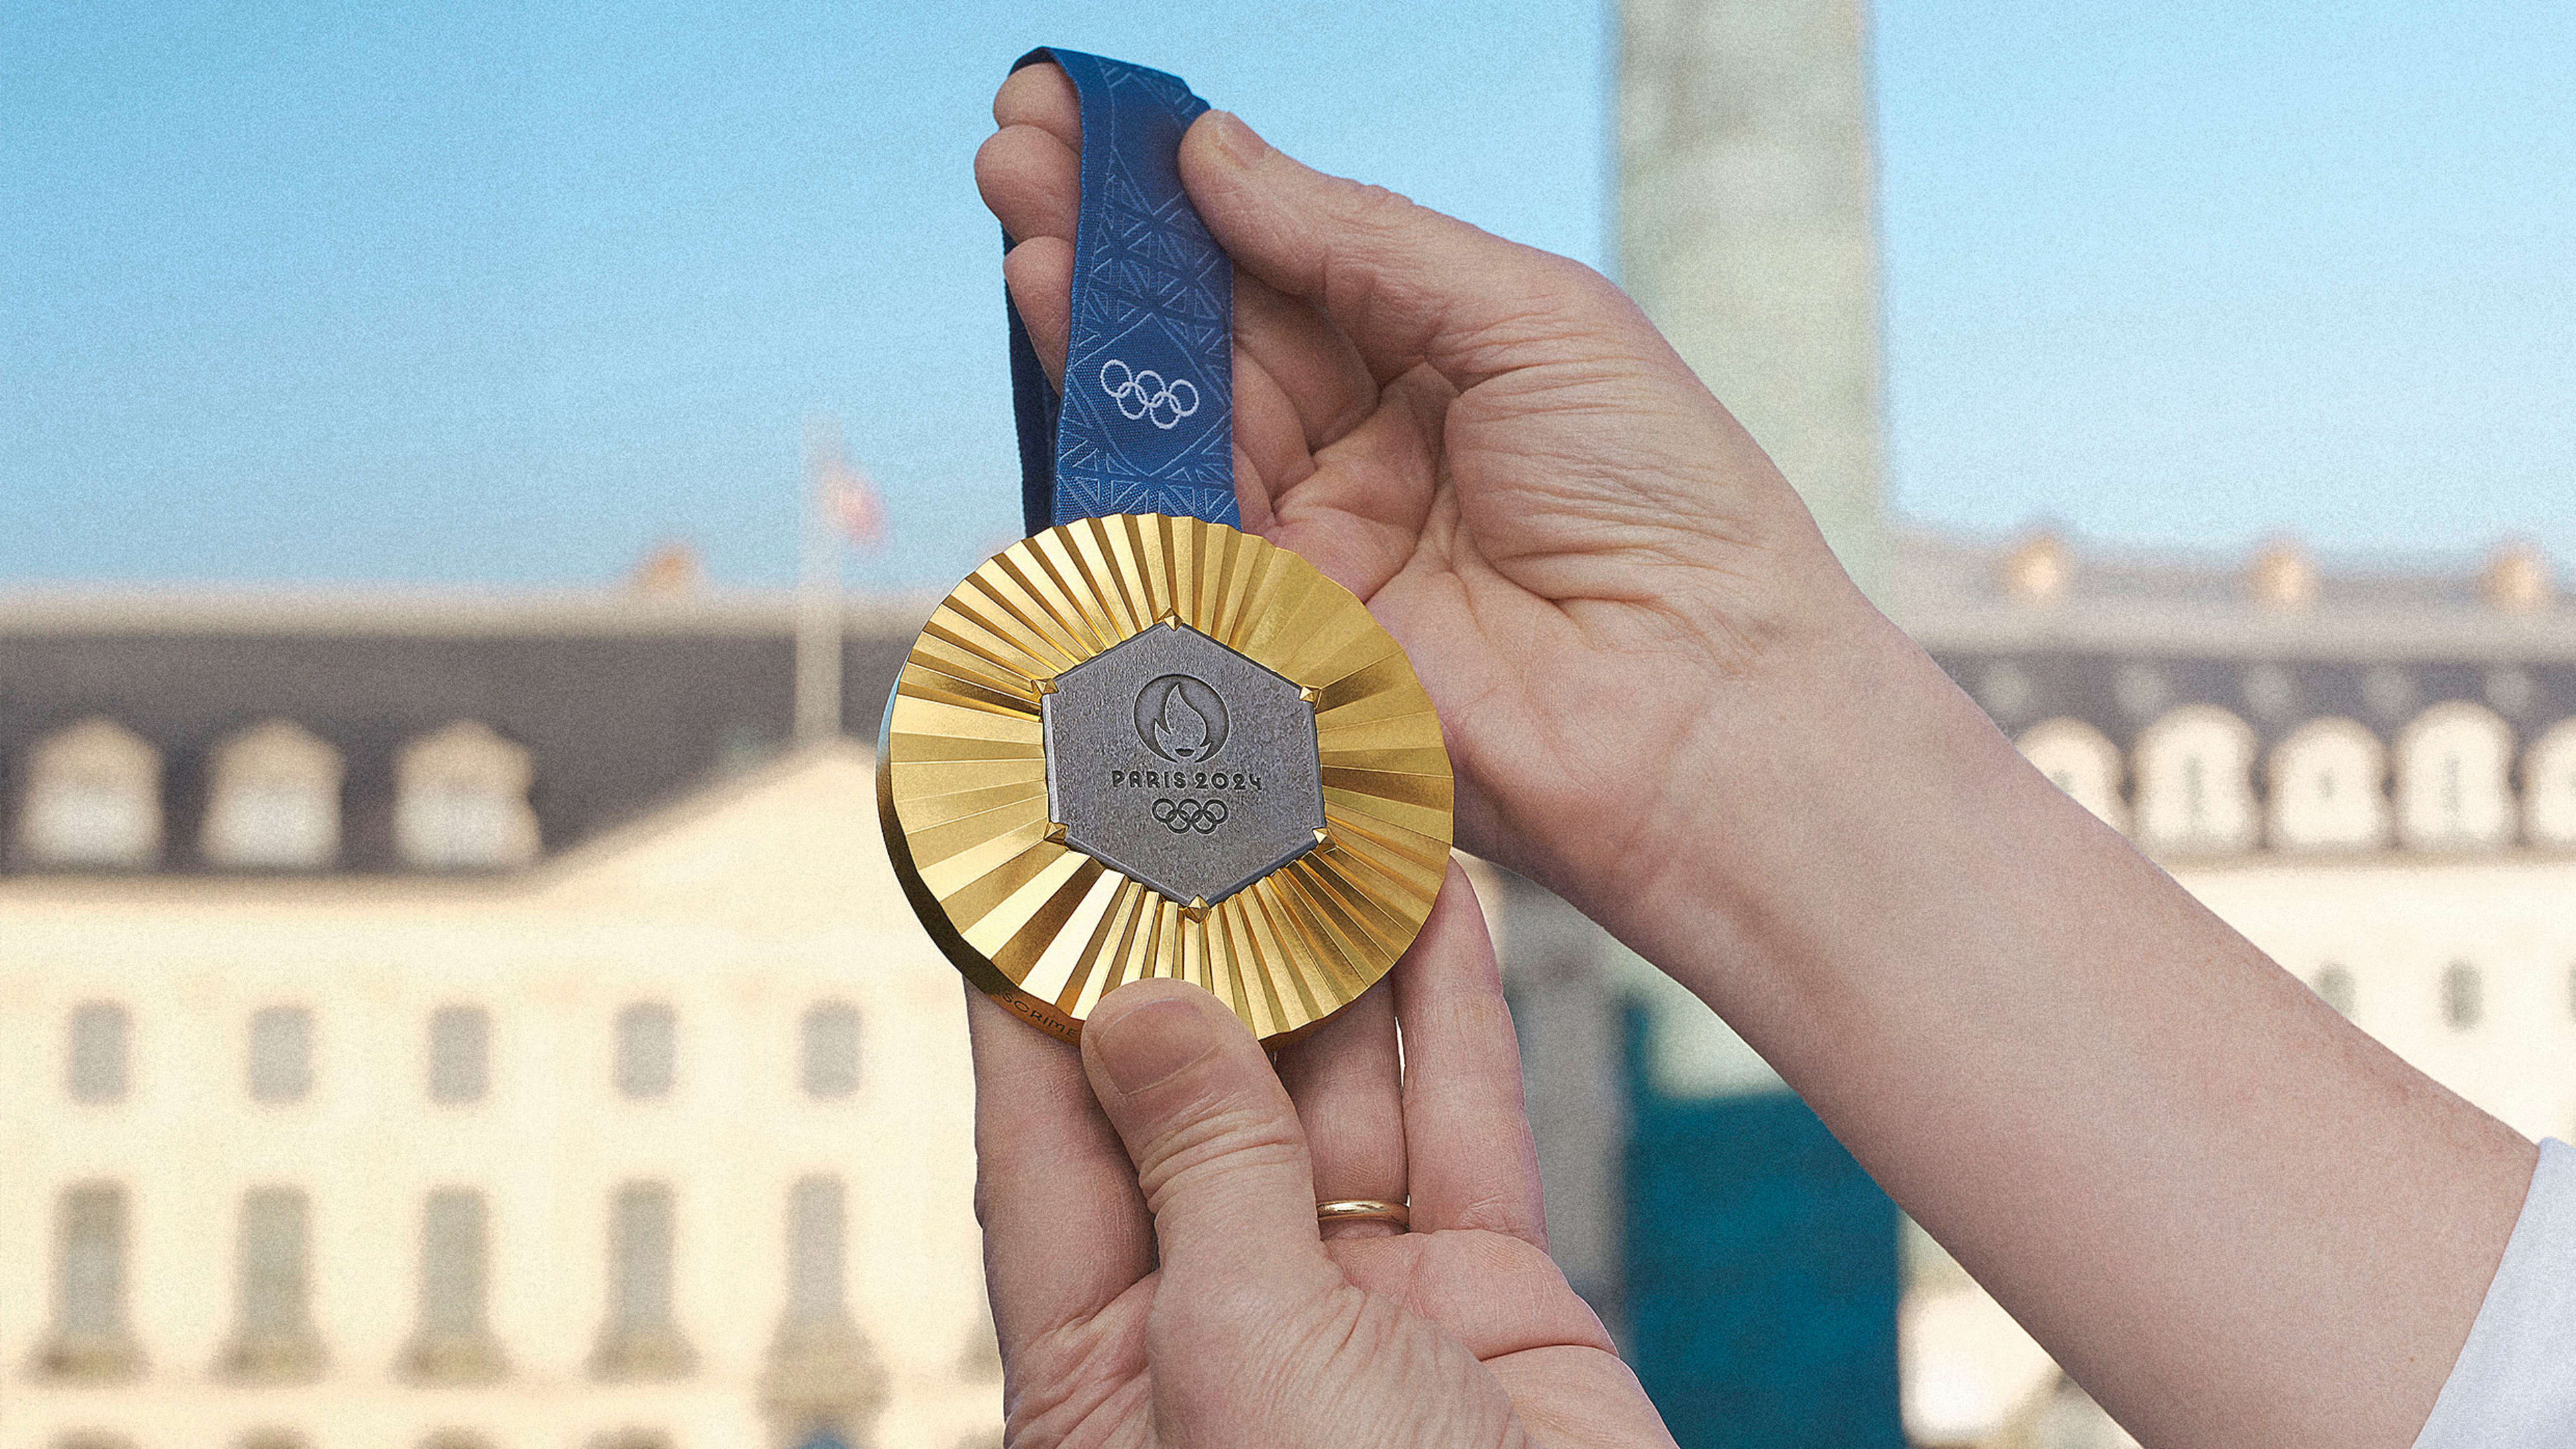 The 2024 Paris Olympic medals have a piece of the Eiffel Tower in them